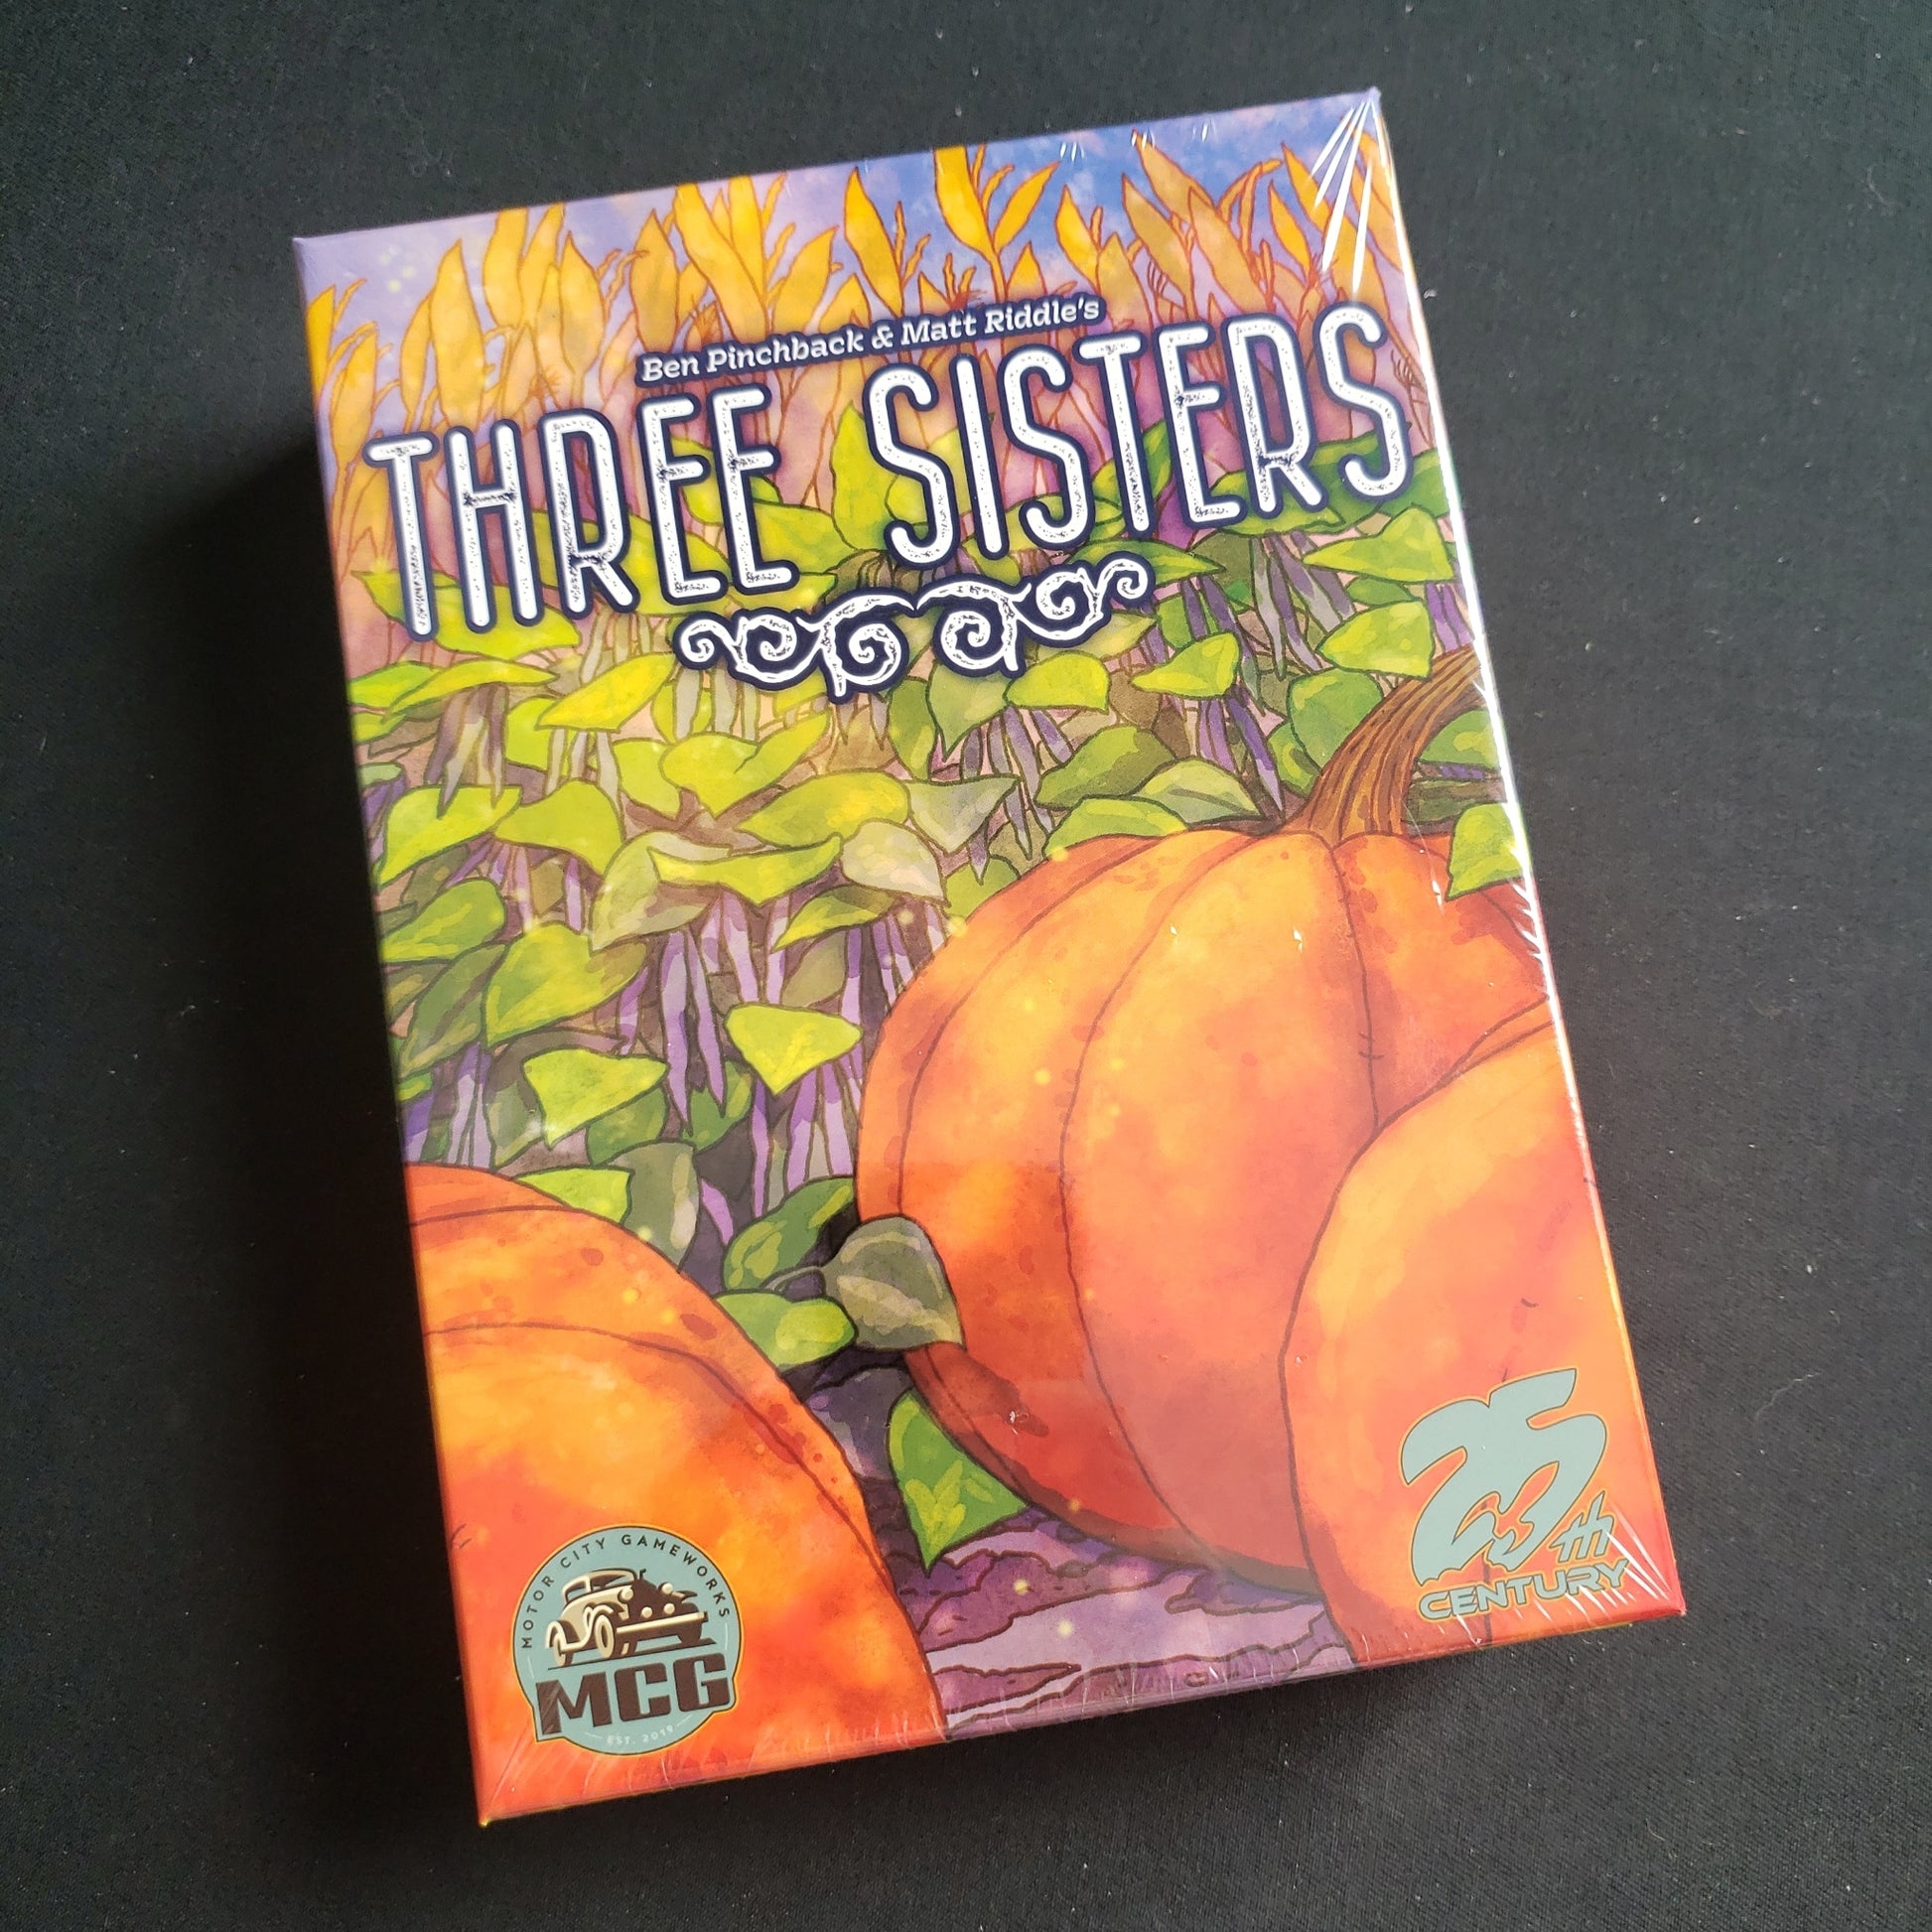 Image shows the front cover of the box of the Three Sisters board game